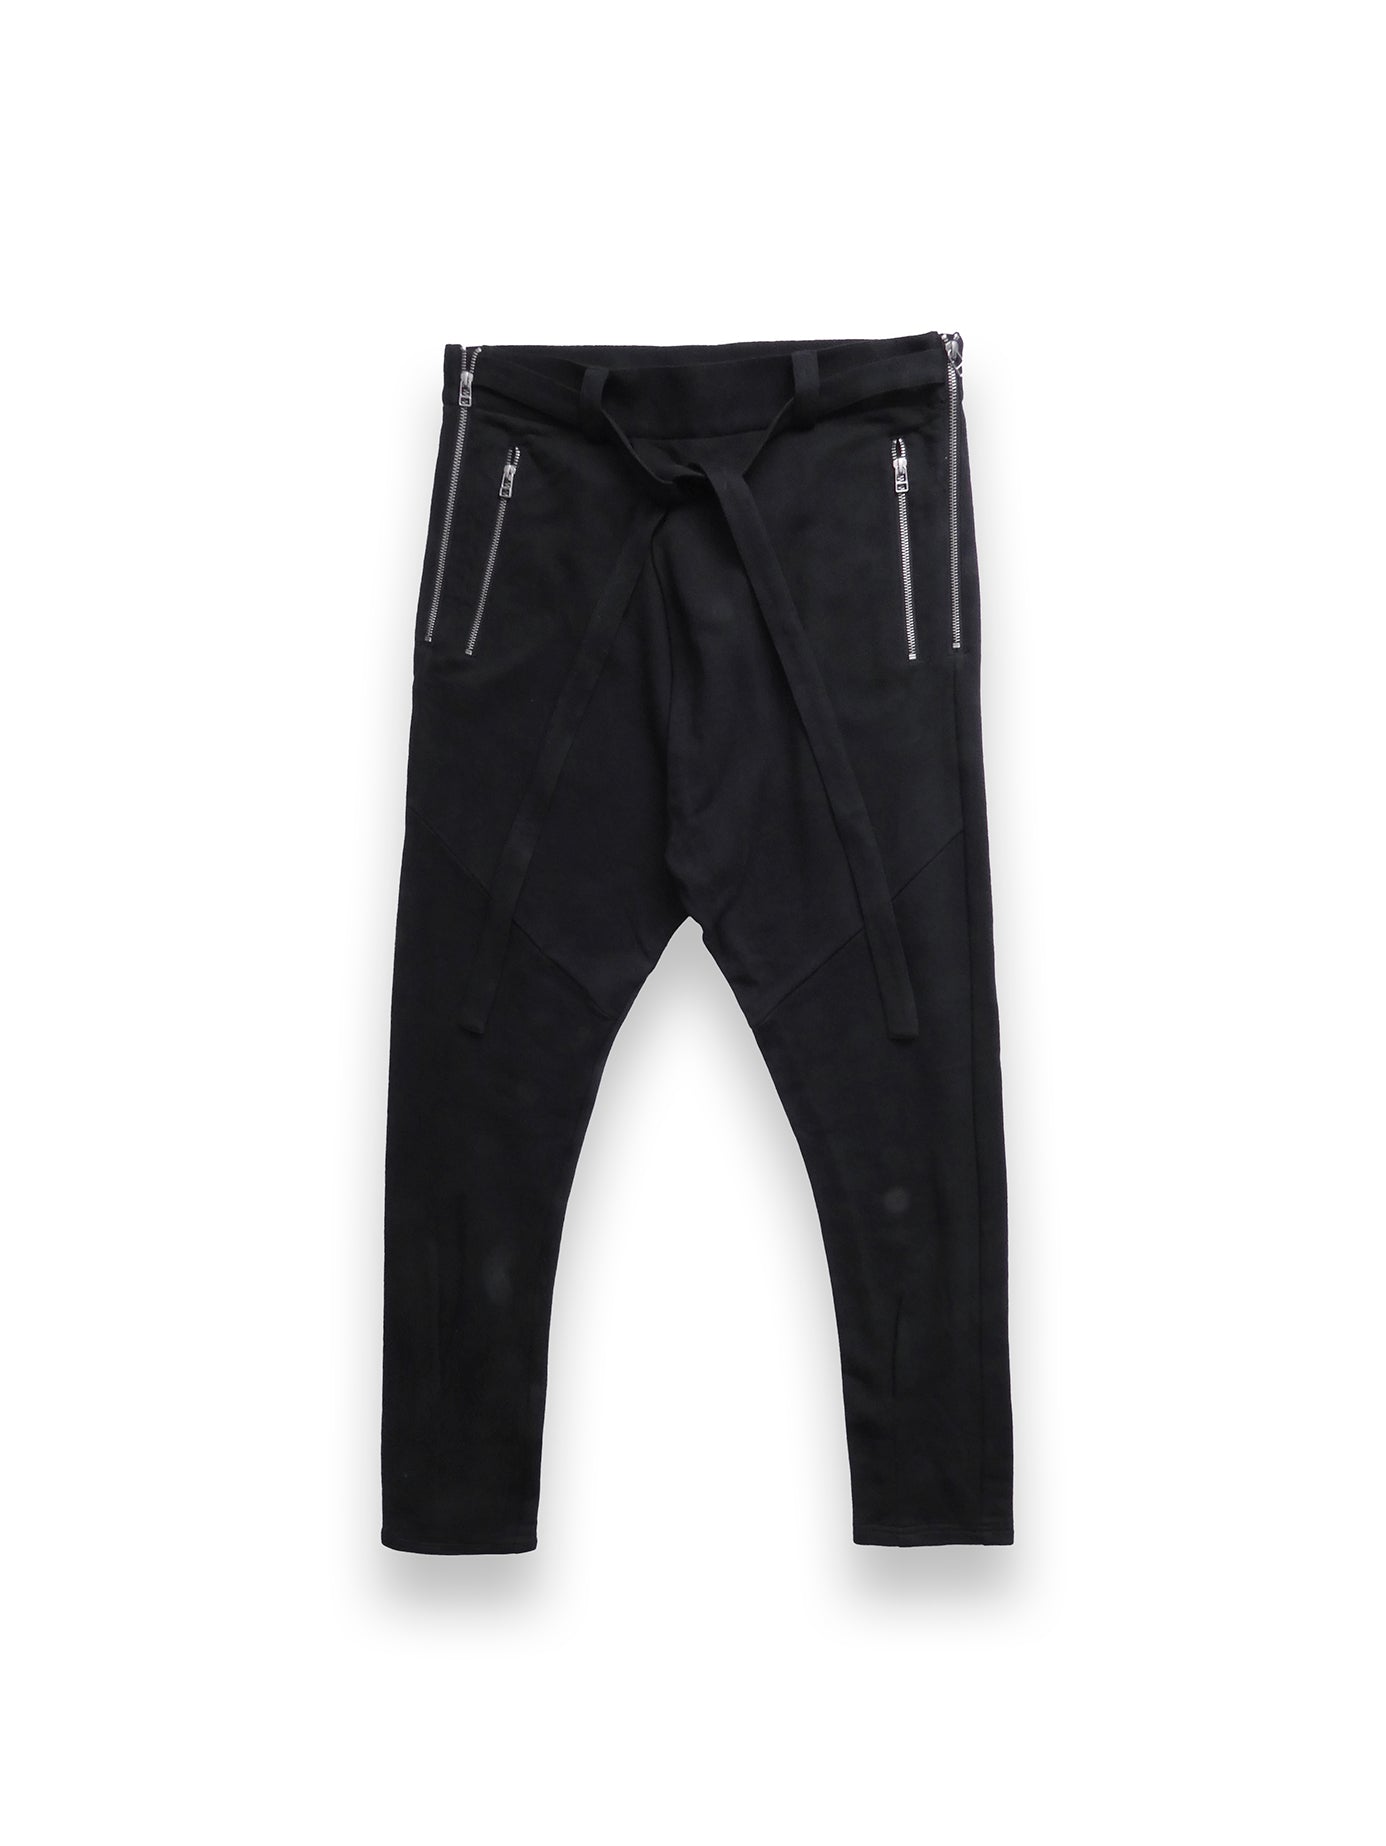 Men's Jogger Style Trousers With Tie Up Detail